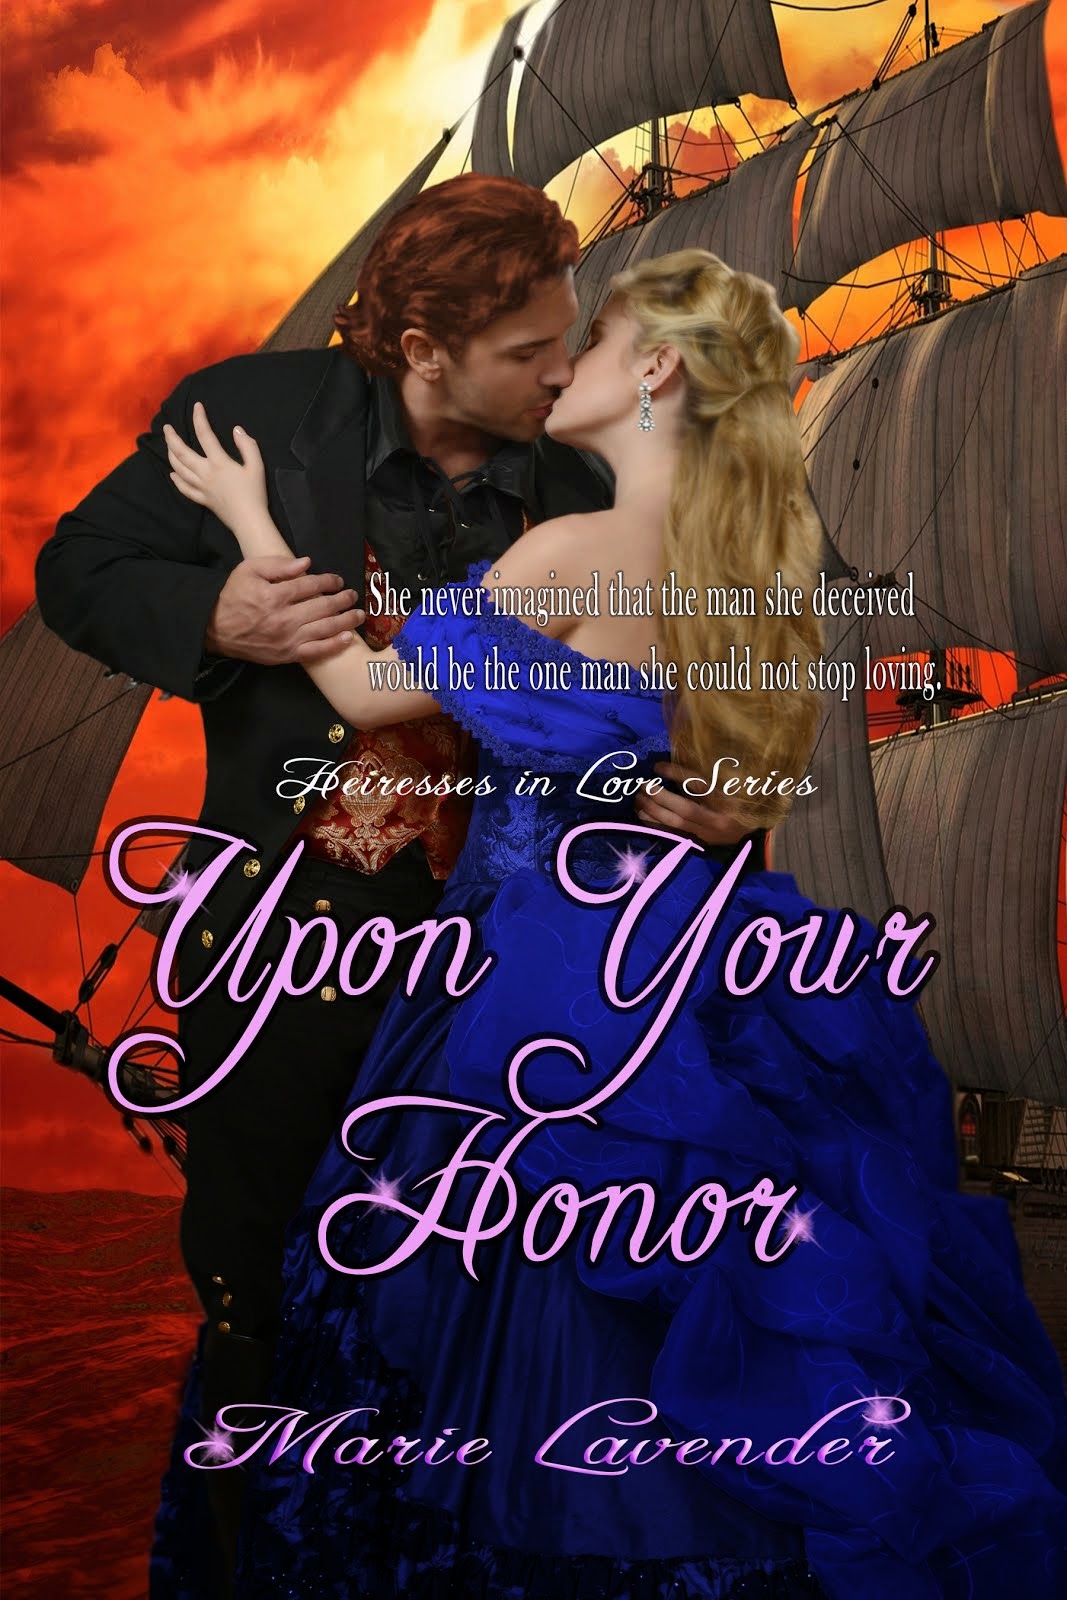 http://www.amazon.com/Upon-Your-Honor-Marie-Lavender-ebook/dp/B00JTKTODG/ref=asap_bc?ie=UTF8